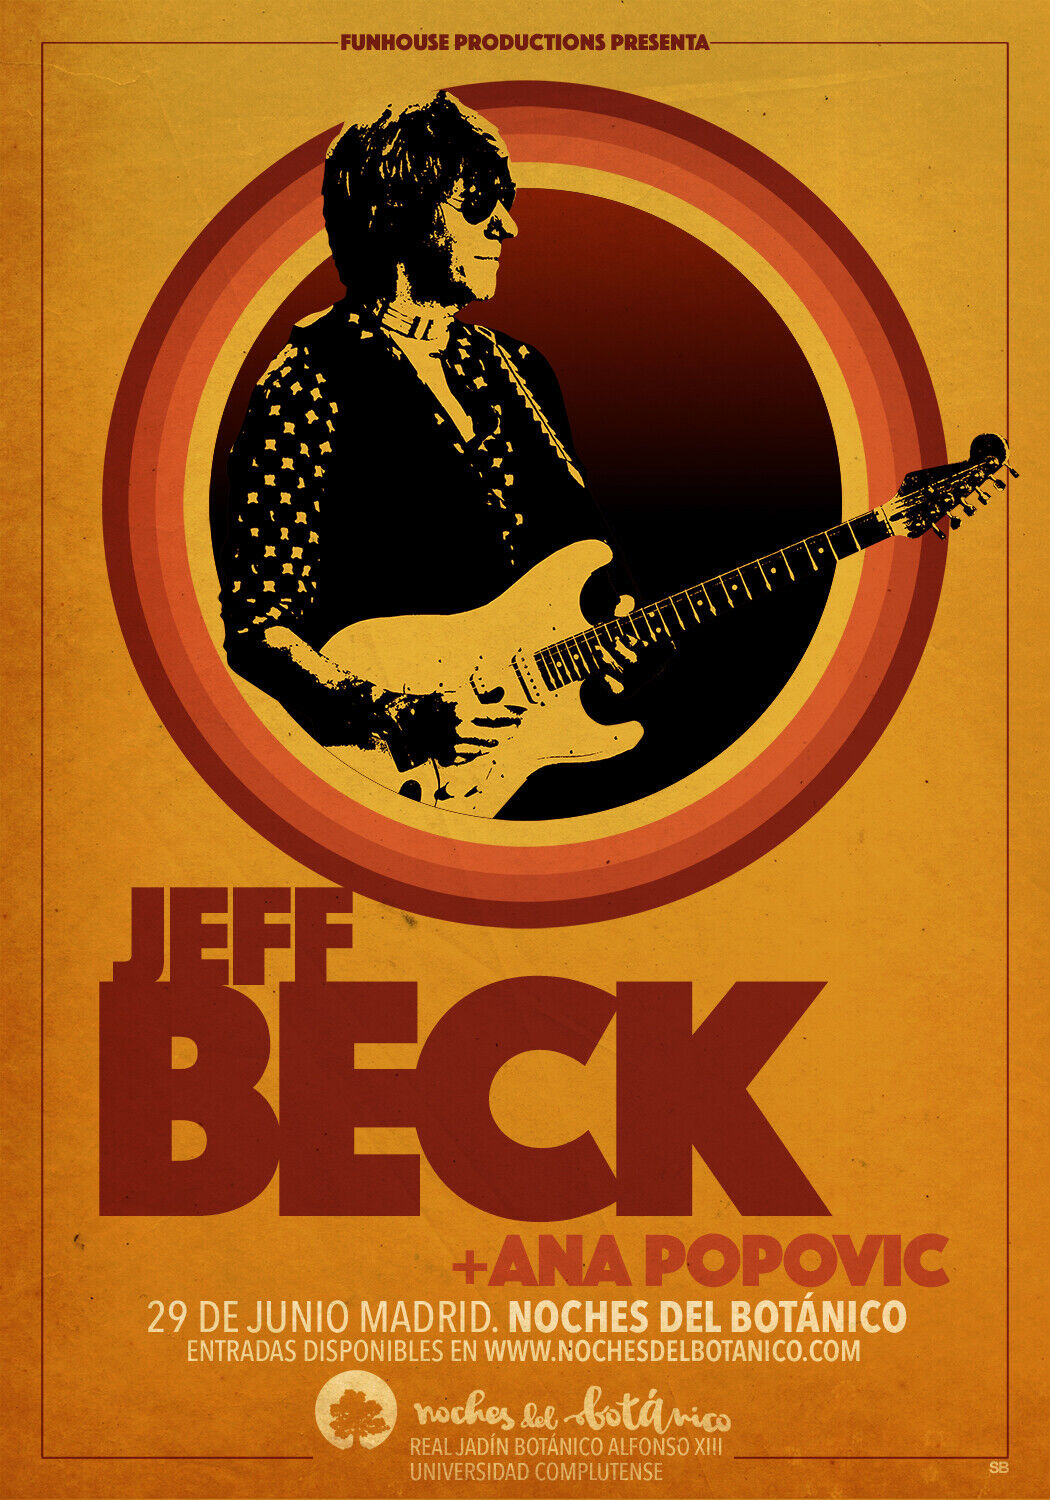 Jeff Beck / Ana Popovic 2018 Madrid, Spain Concert Tour Poster - Classic Rock